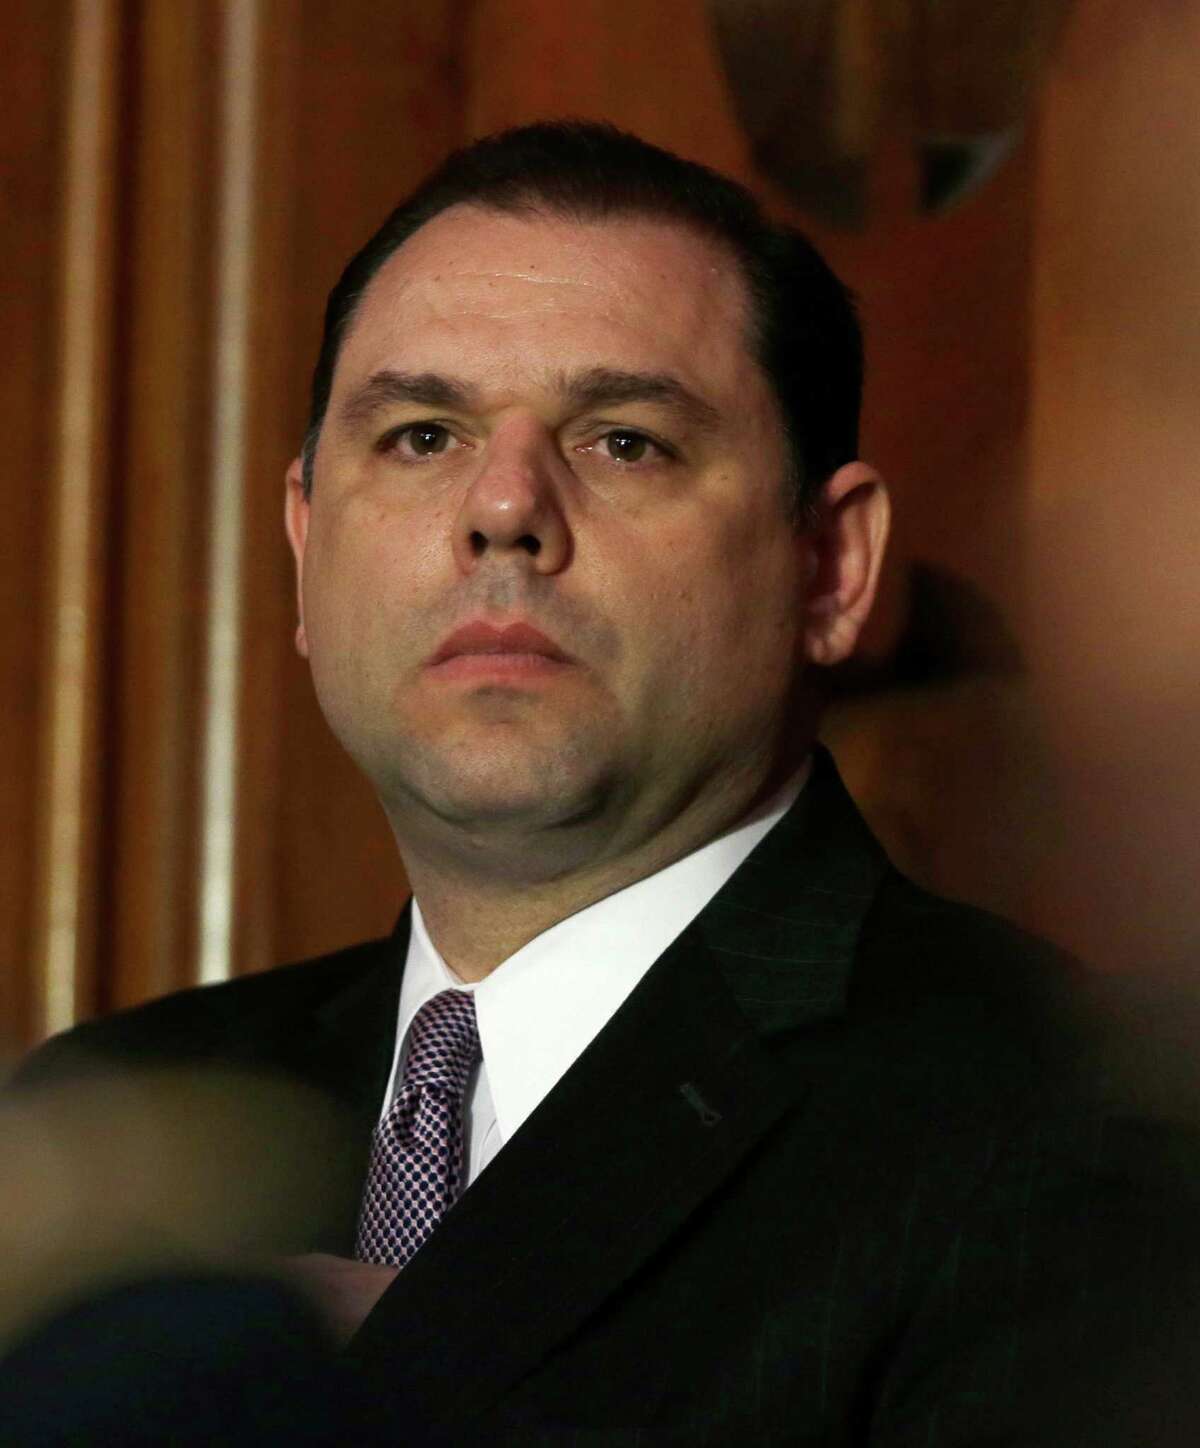 Multiple sources said that Joseph Percoco, former executive deputy secretary for Gov. Andrew Cuomo, contacted members of the Moreland Commission to solicit their support of the governor in the wake of allegations the governor's secretary, Larry Schwartz, interfered with the anti-corruption panel's investigation of entities tied to Cuomo. (AP Photo/Mike Groll)